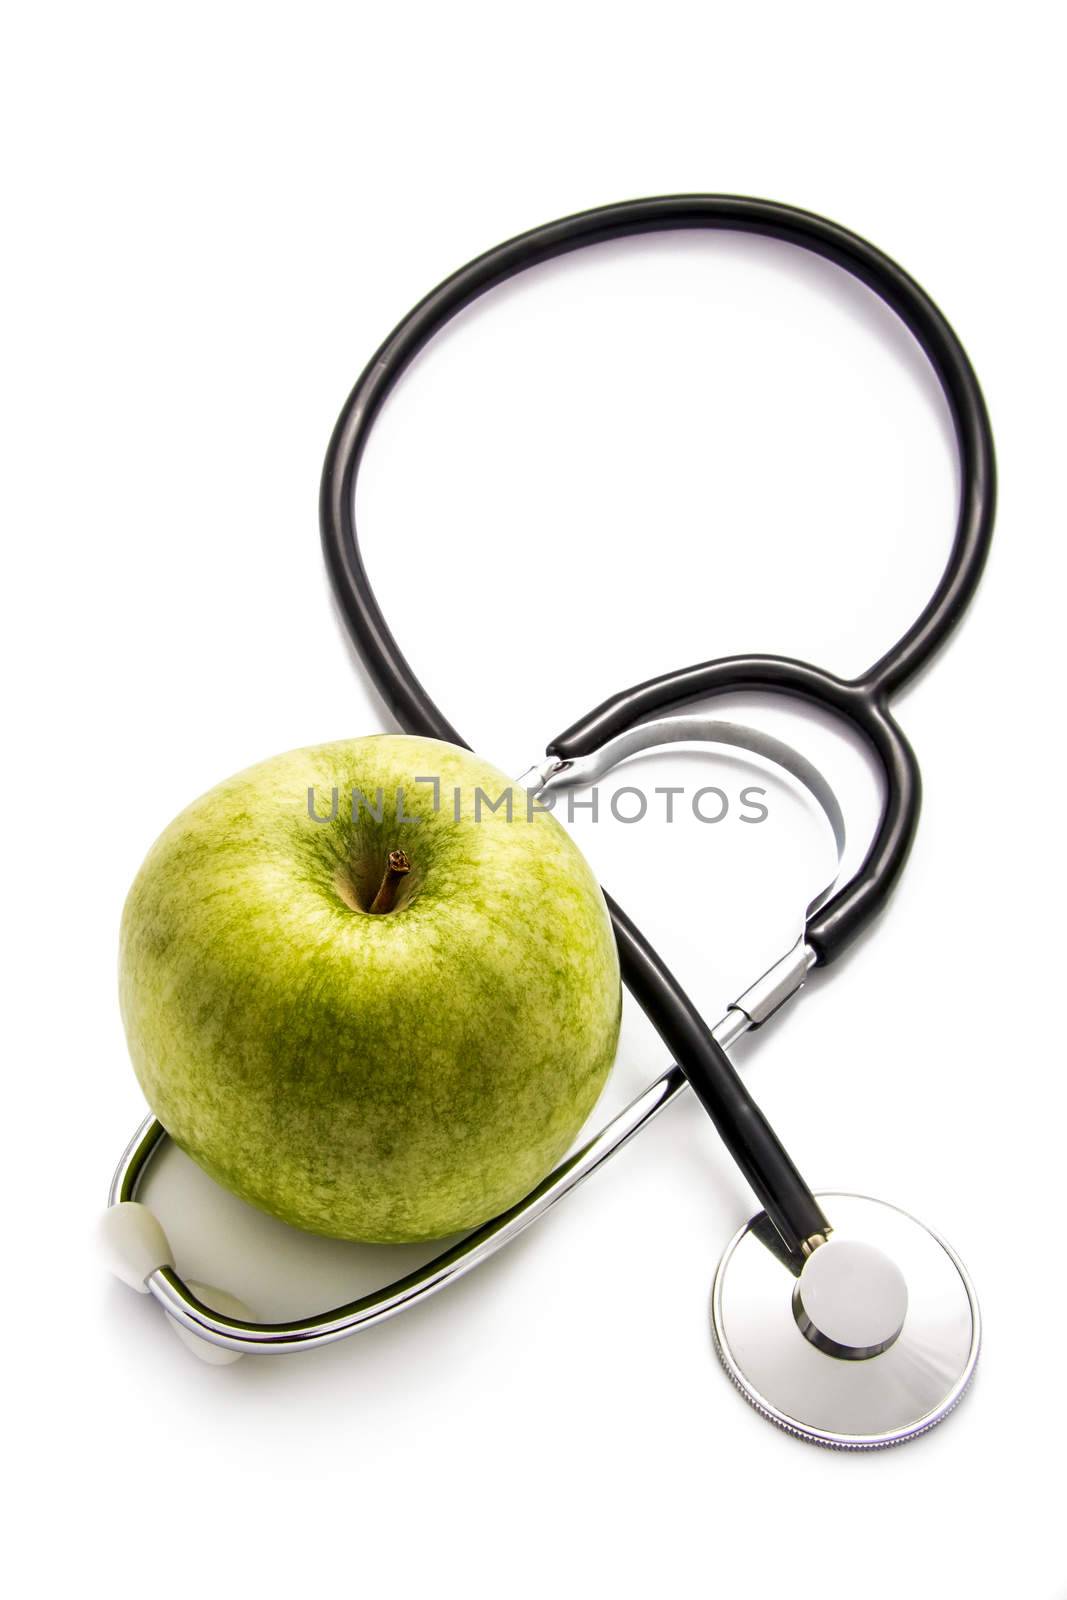 Green apple and a stethoscope on white background